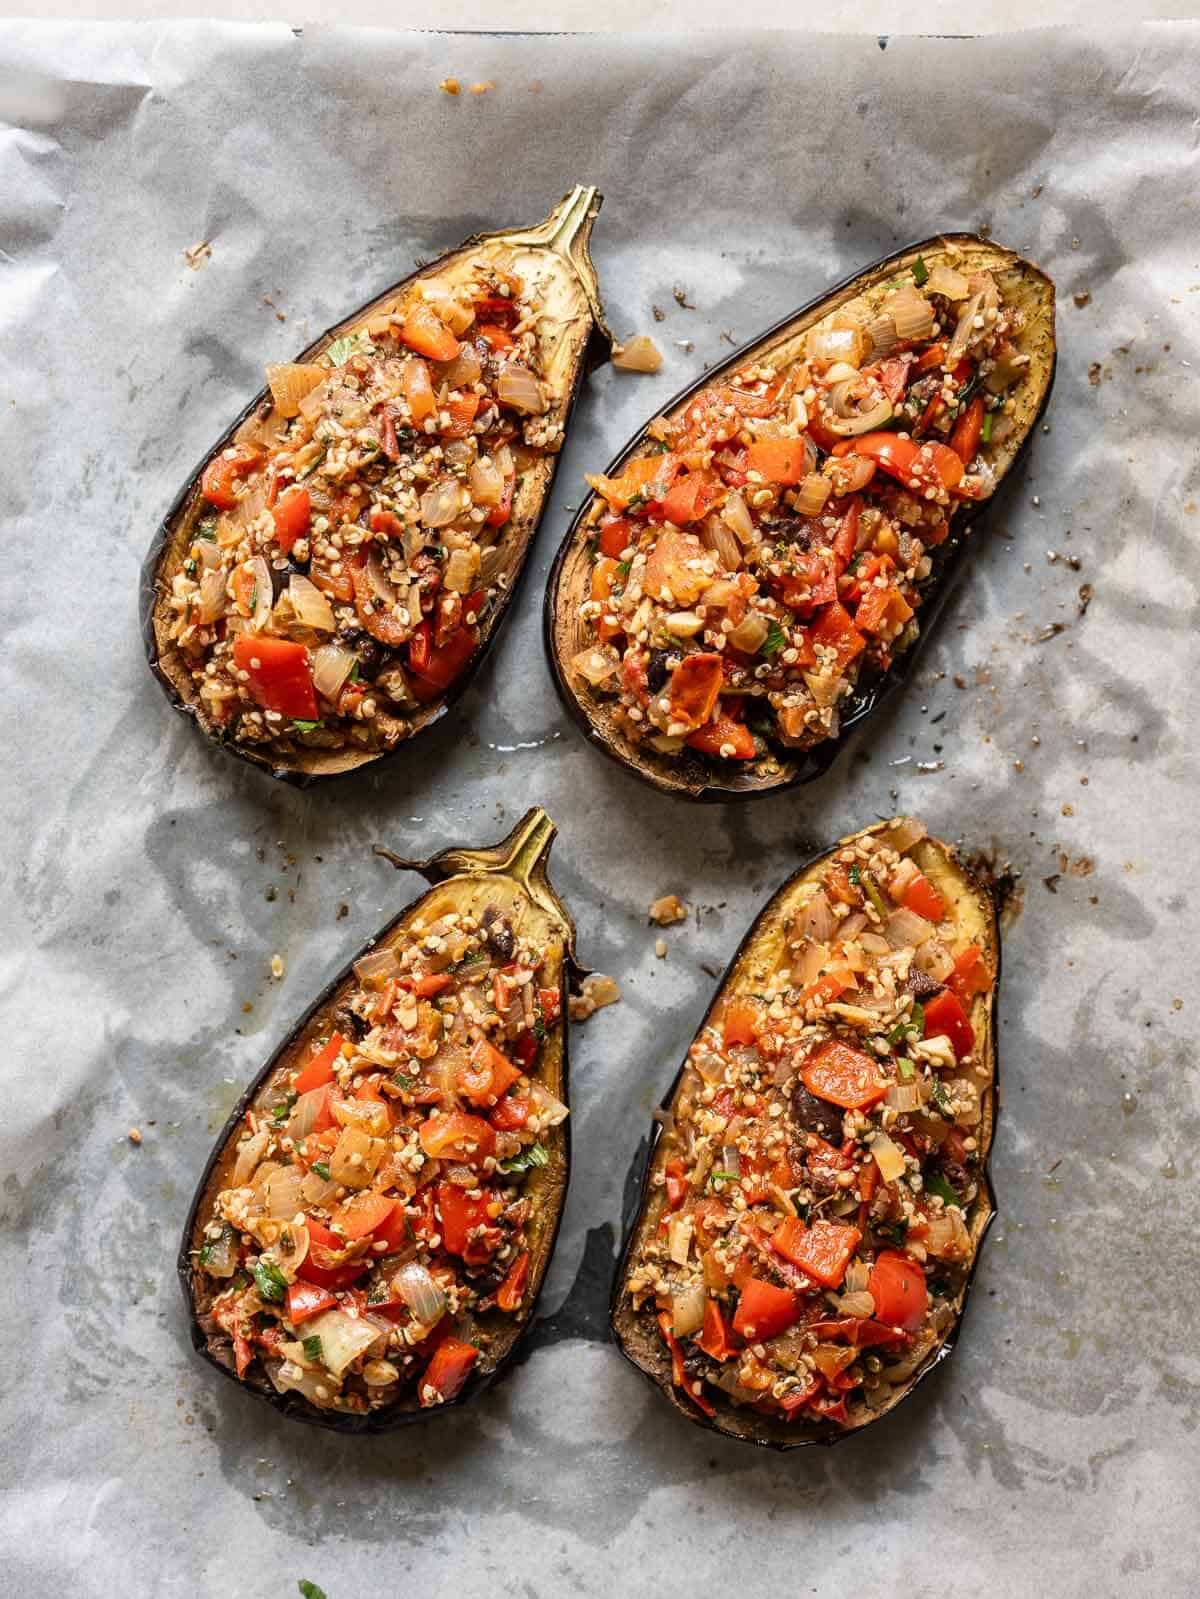 add the stuffing to the roasted eggplant boats.